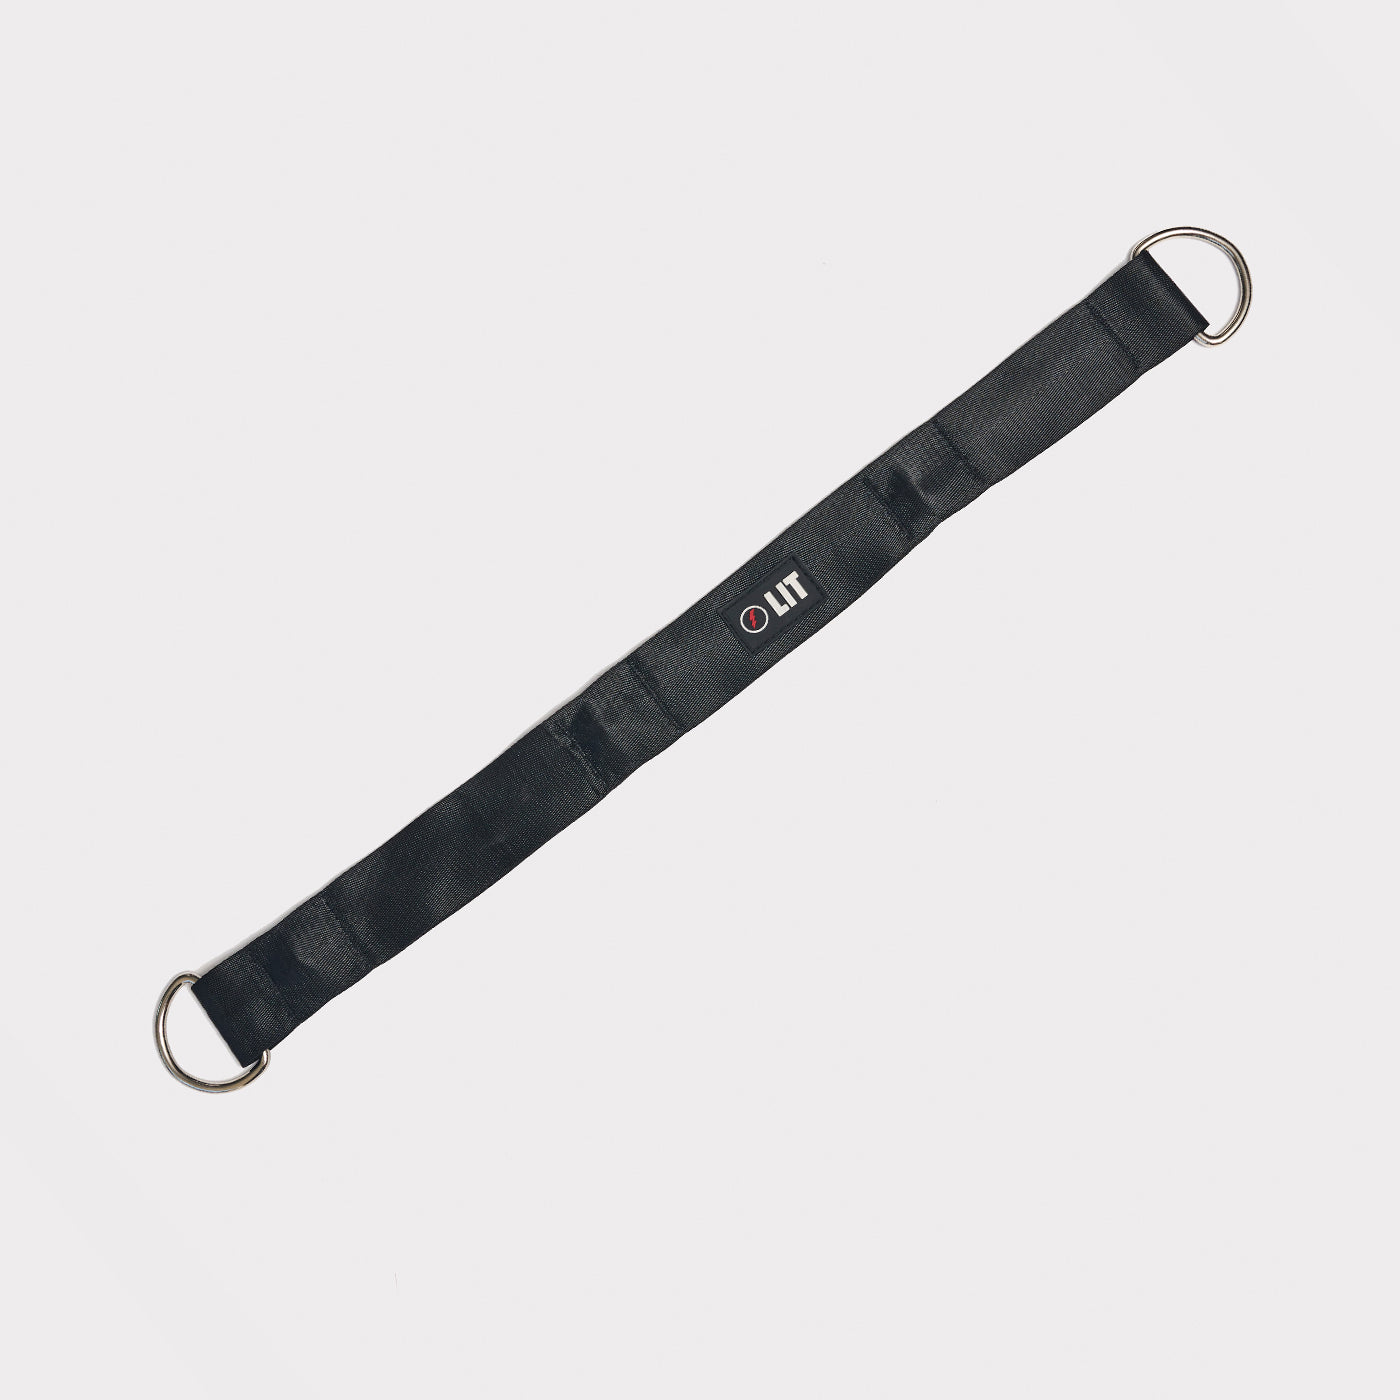 Universal anchor for resistance bands